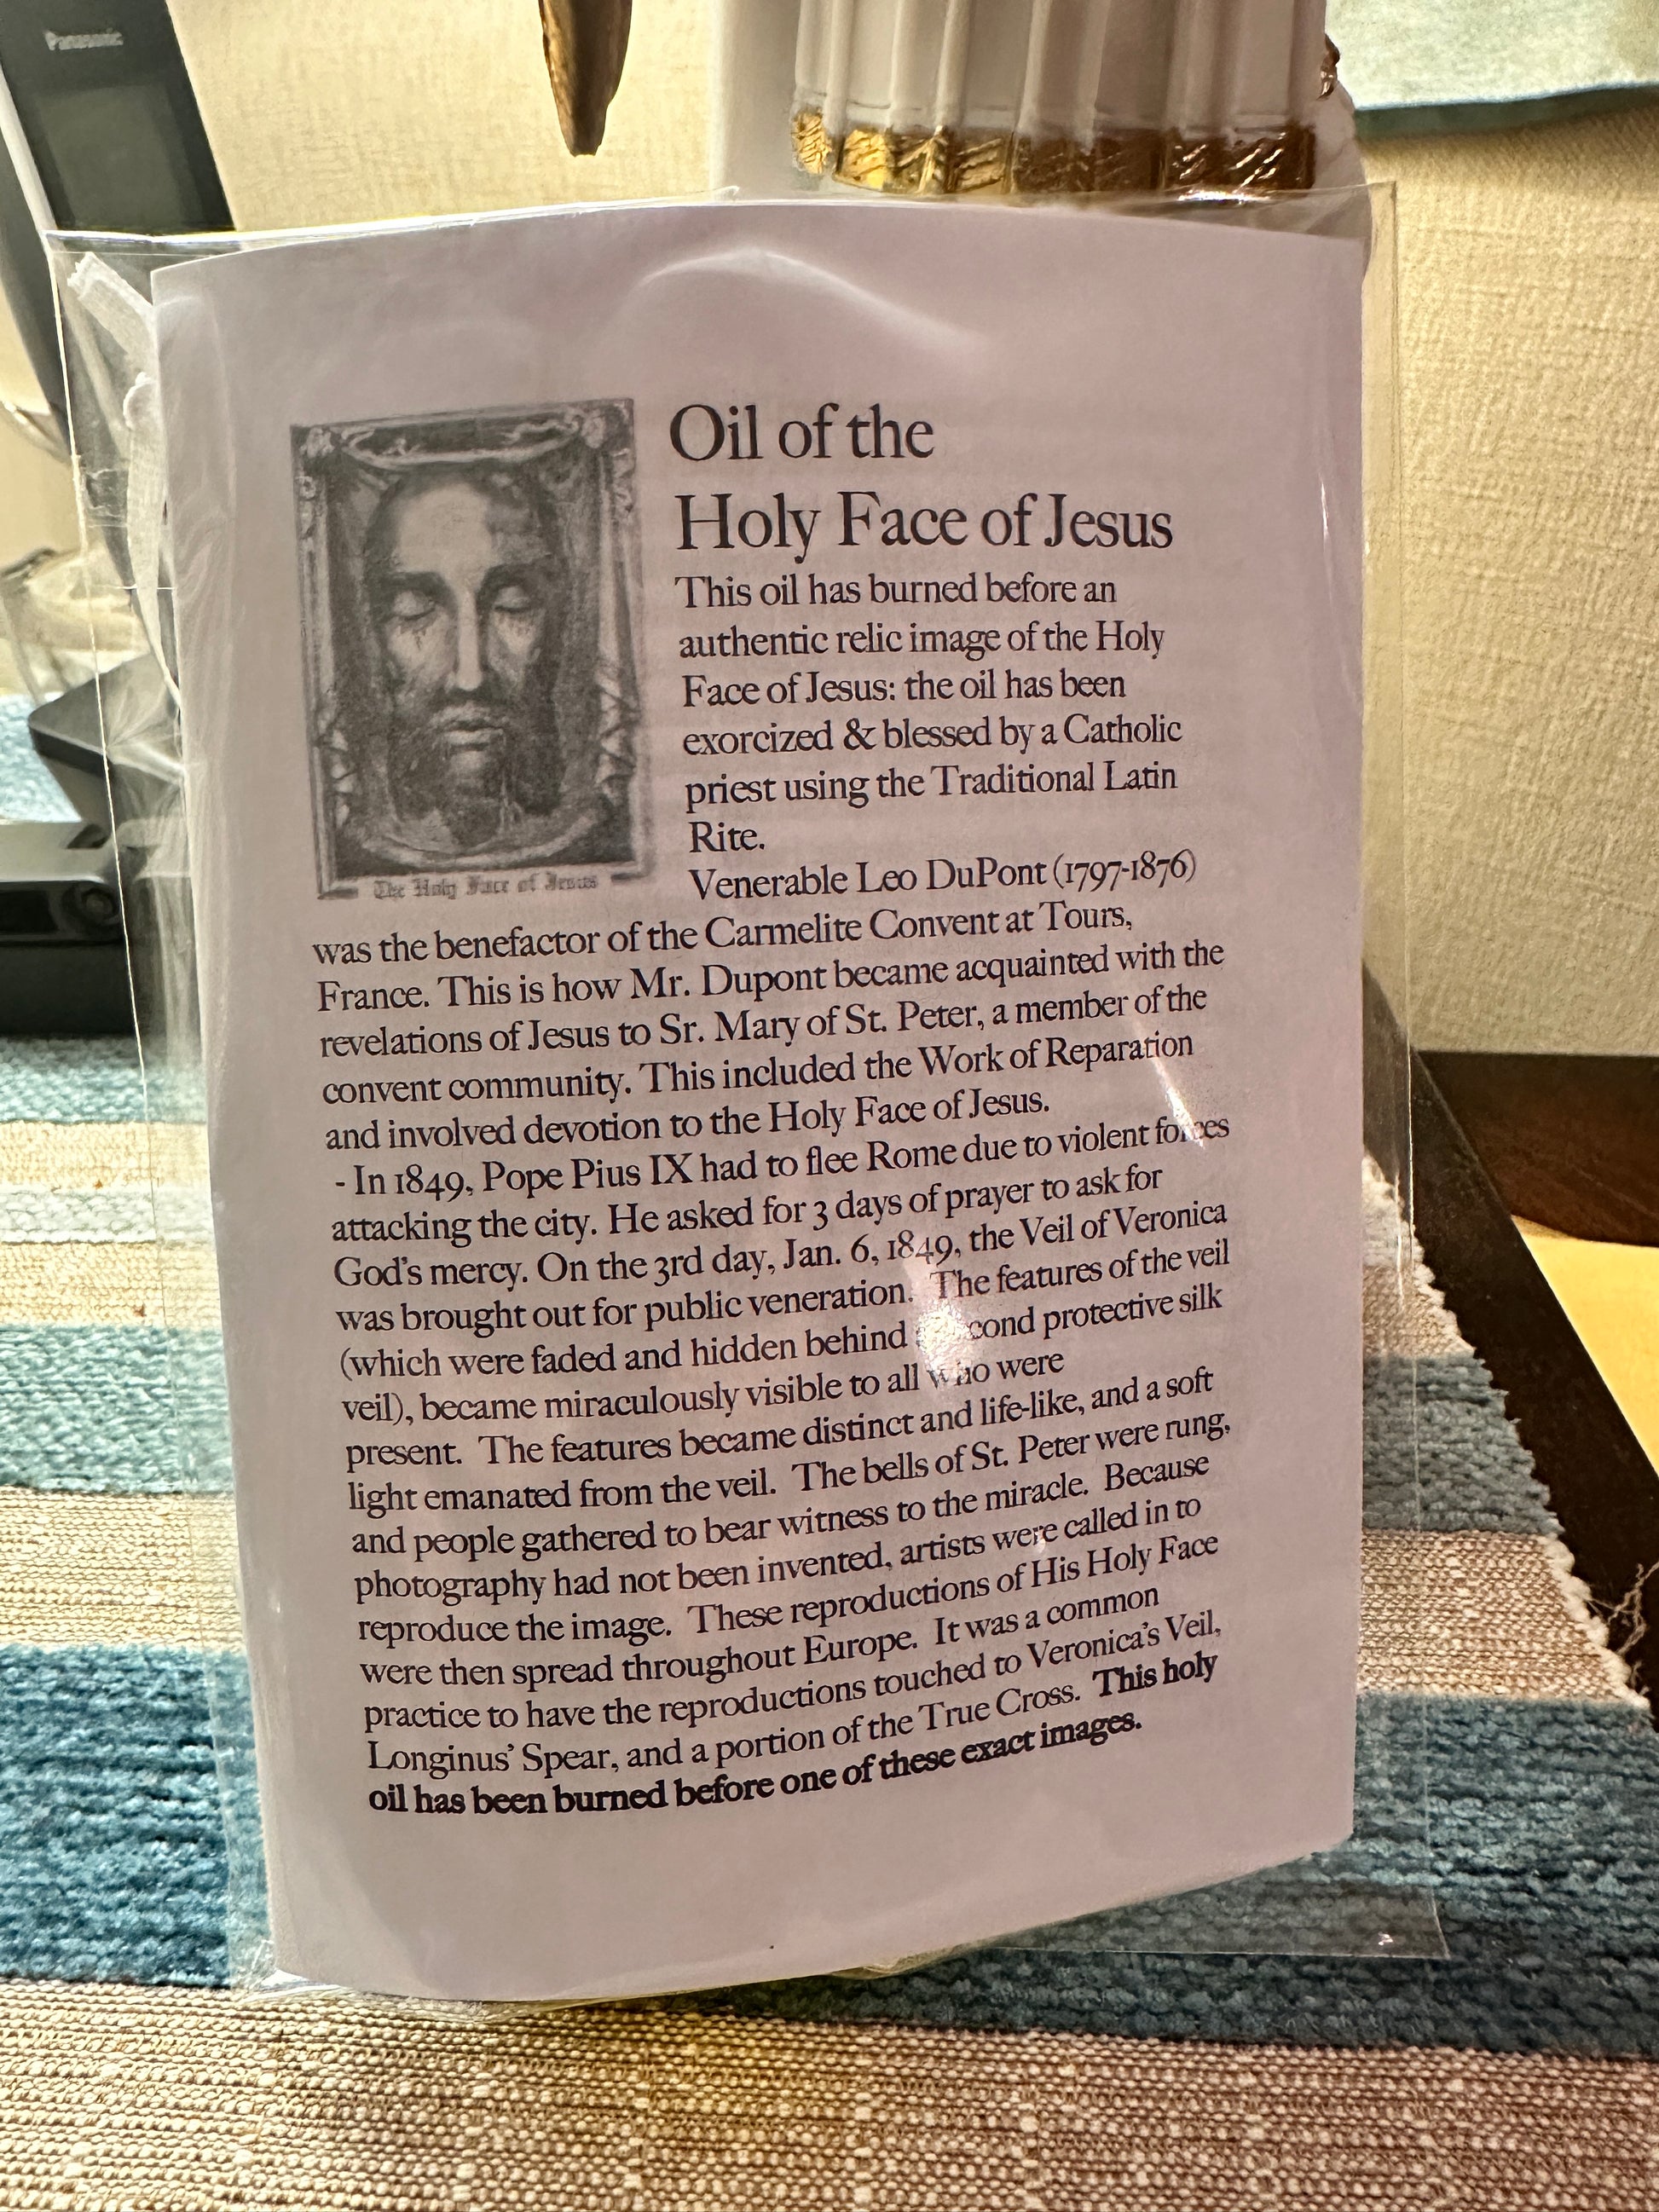 Oil of the Holy Face of Jesus